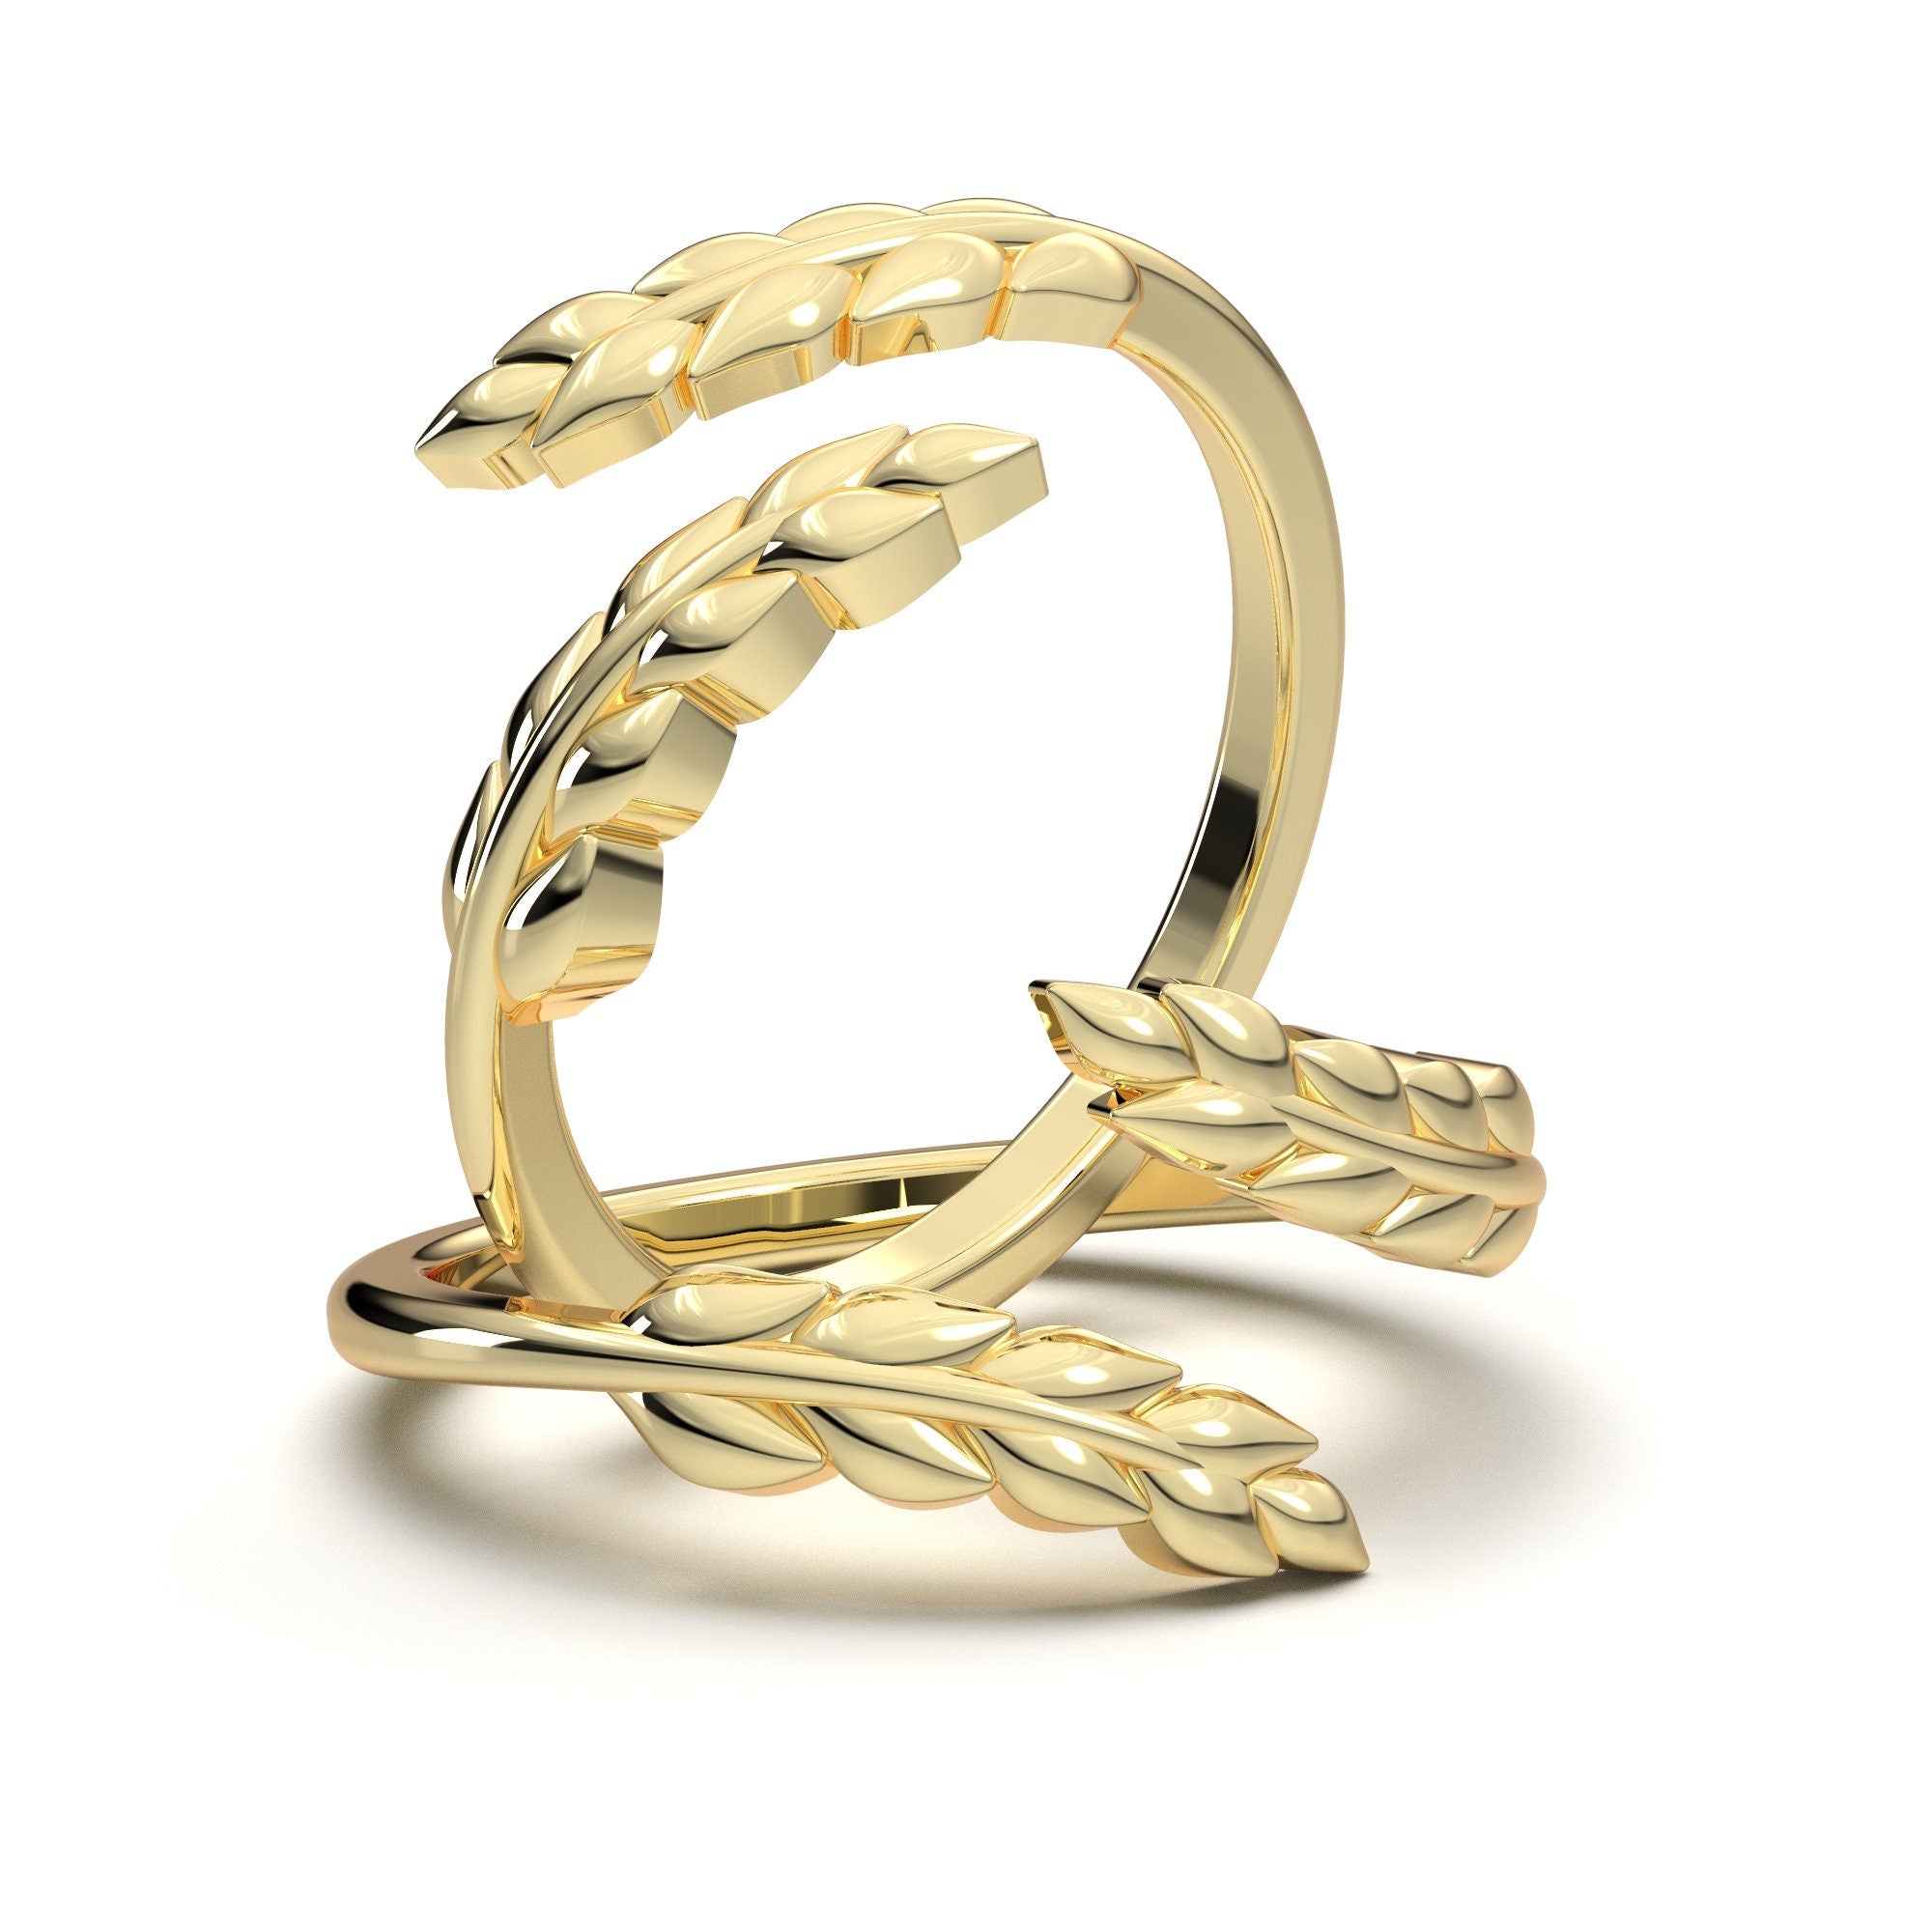 Gold Cannabis Leaf Ring - IF & Co.